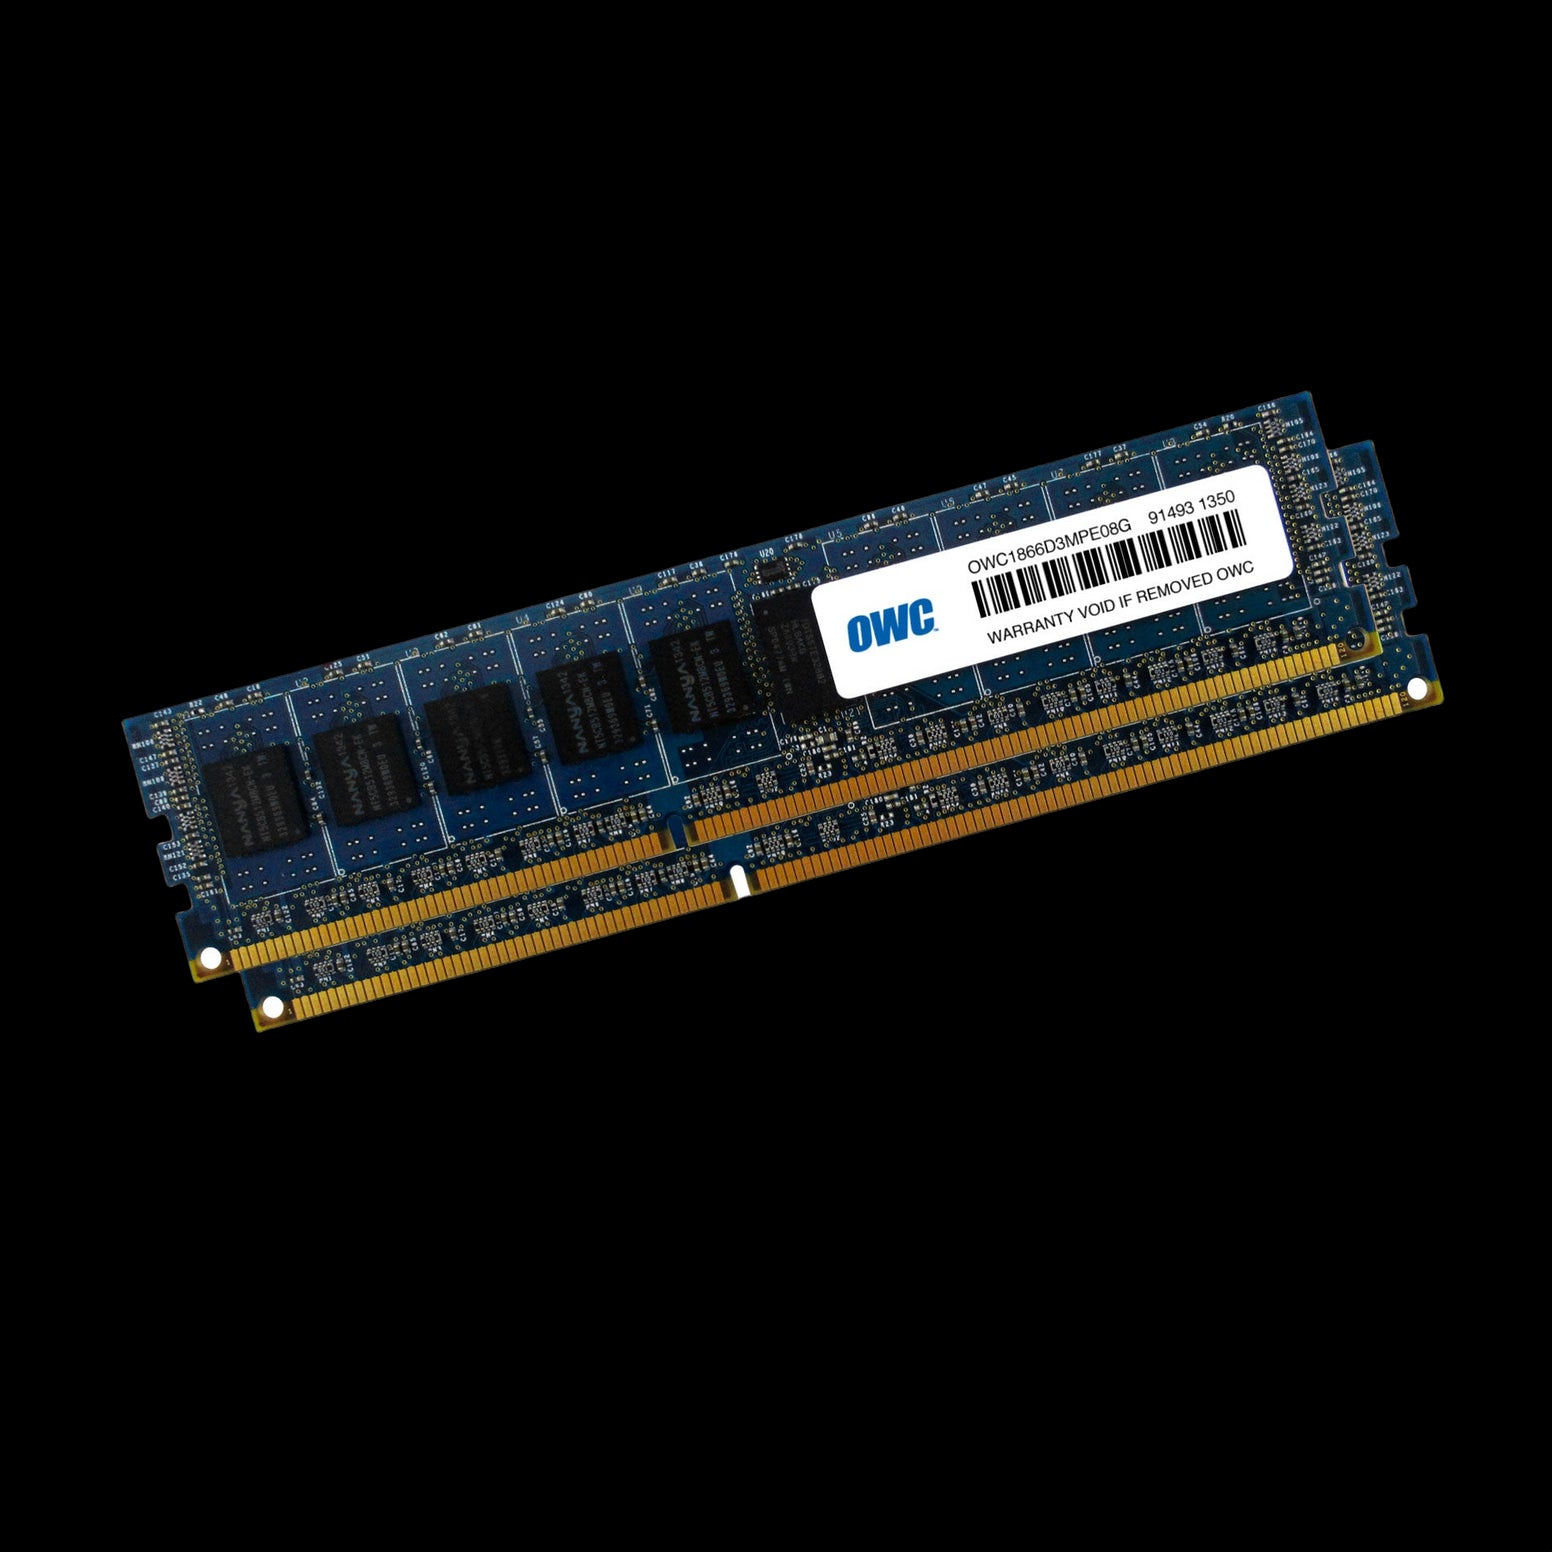 16GB OWC Matched Memory Upgrade Kit (2 x 8GB) 1866MHz PC3-14900 DDR3 ECC Non-Registered 240 Pin SDRAM